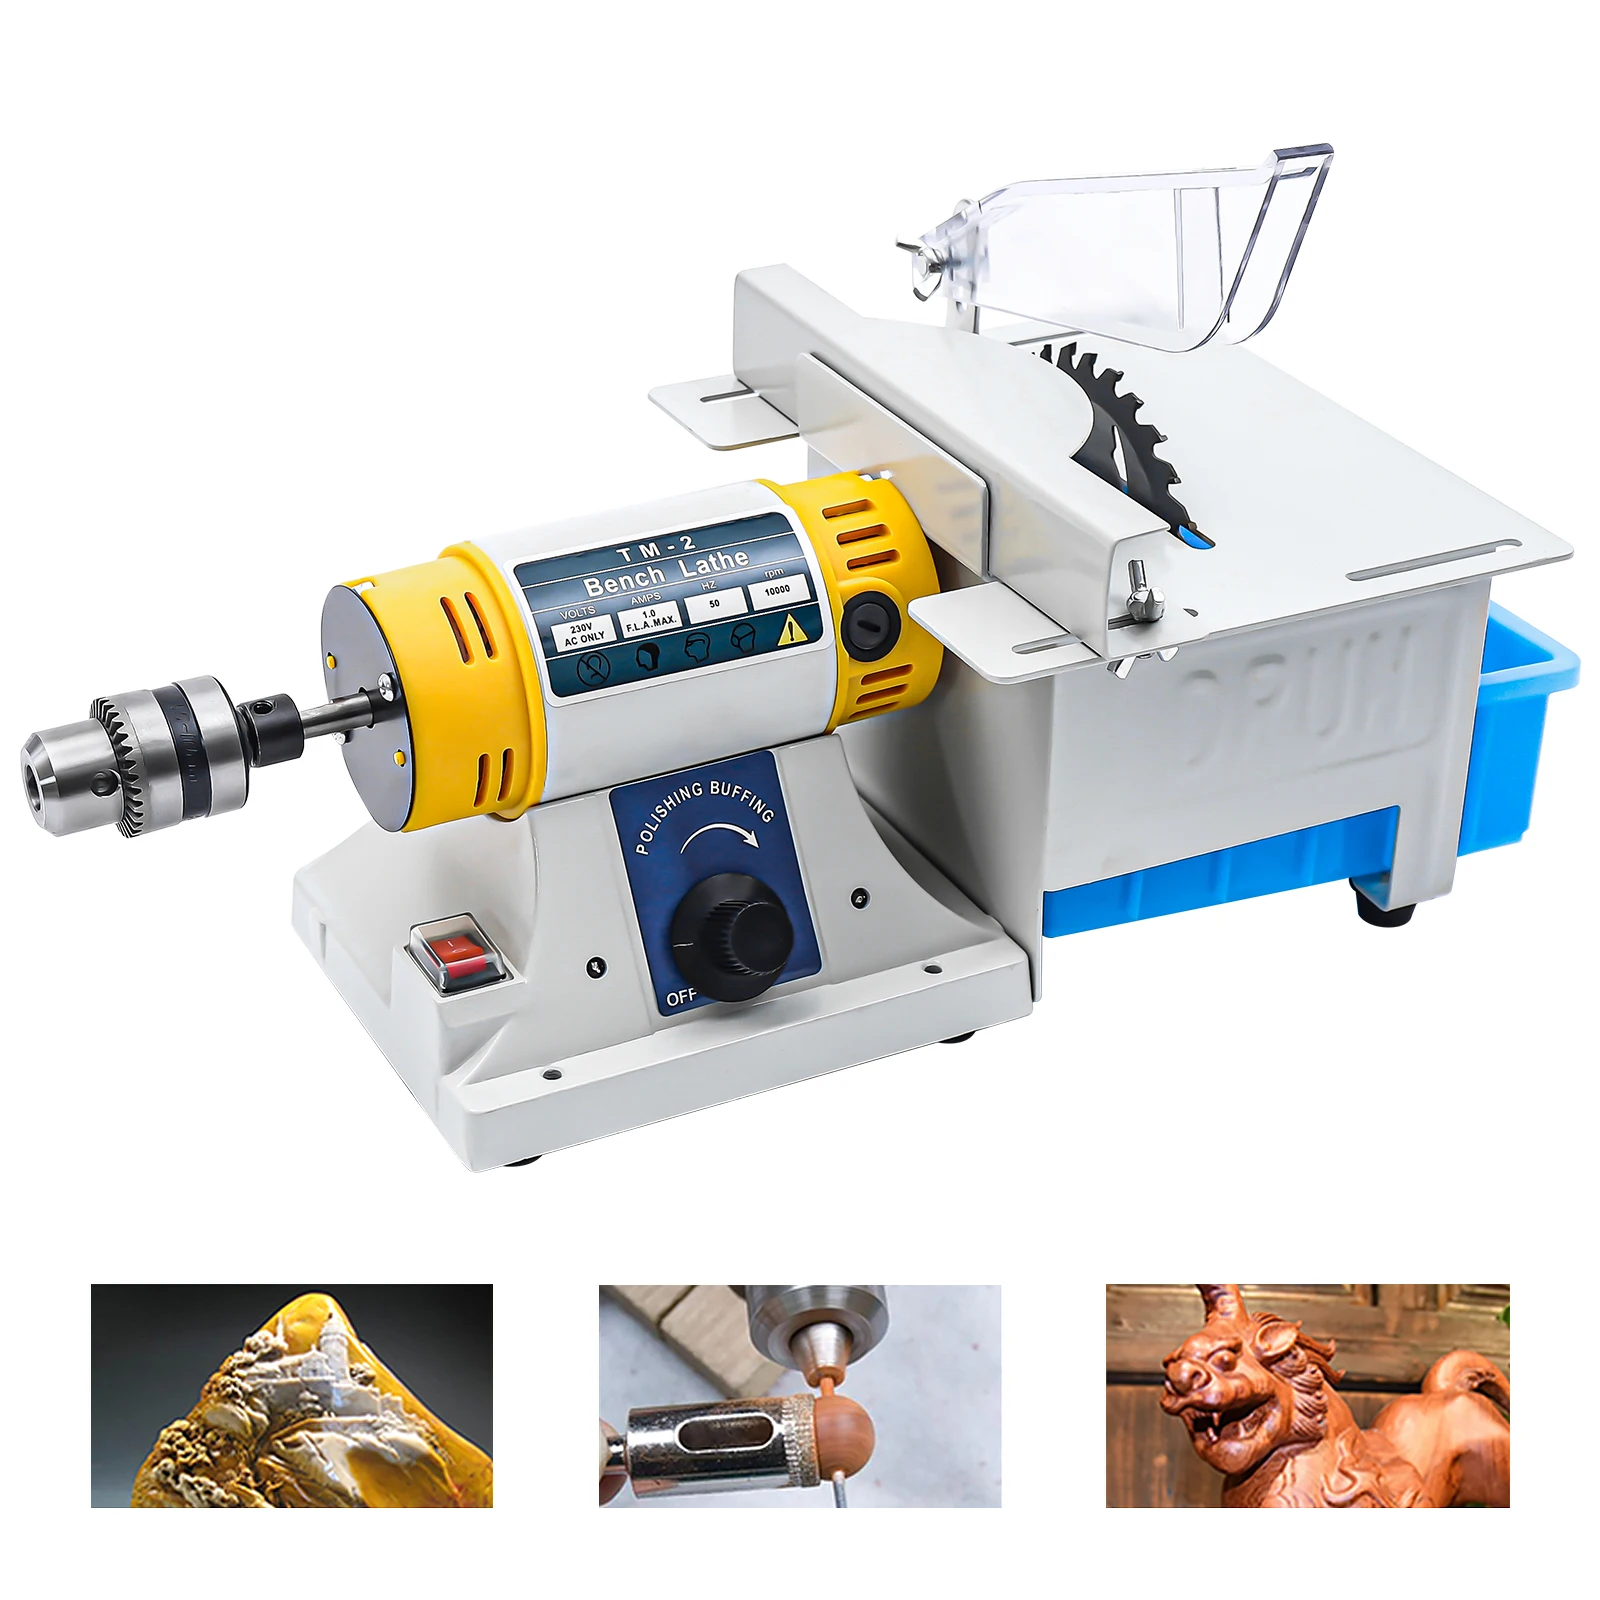 Jewelry Lapidary Saw for Cutting Rocks DIY Lapidary Equipment, 110V Mini Table Saws Grinder Polishing Machine 0-10000r min with Flexible Shaft,Left Be - 5